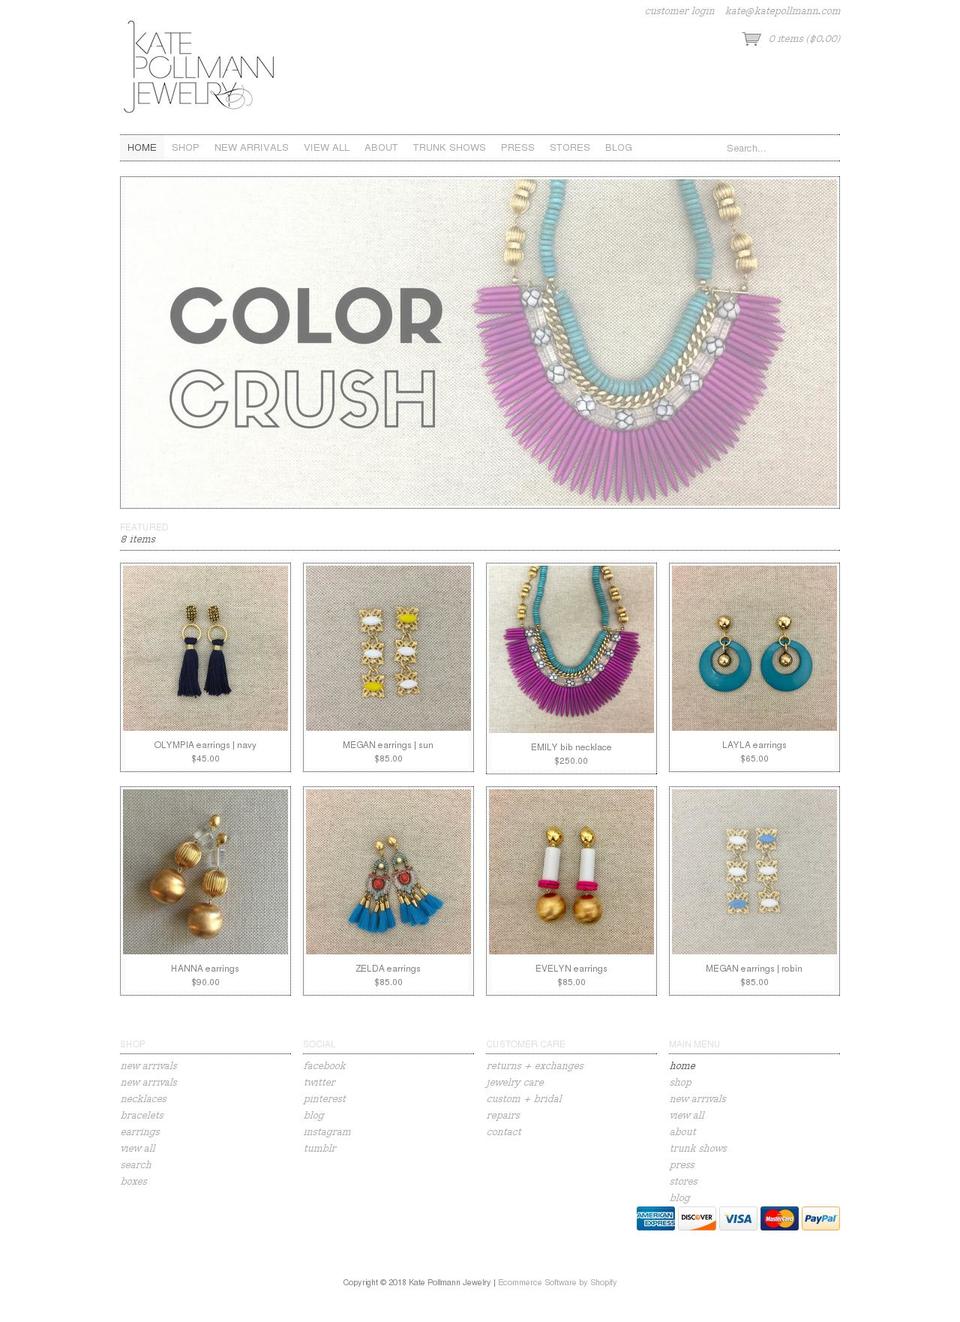 Copy of Copy of Couture Shopify theme site example katepollmannjewelry.com